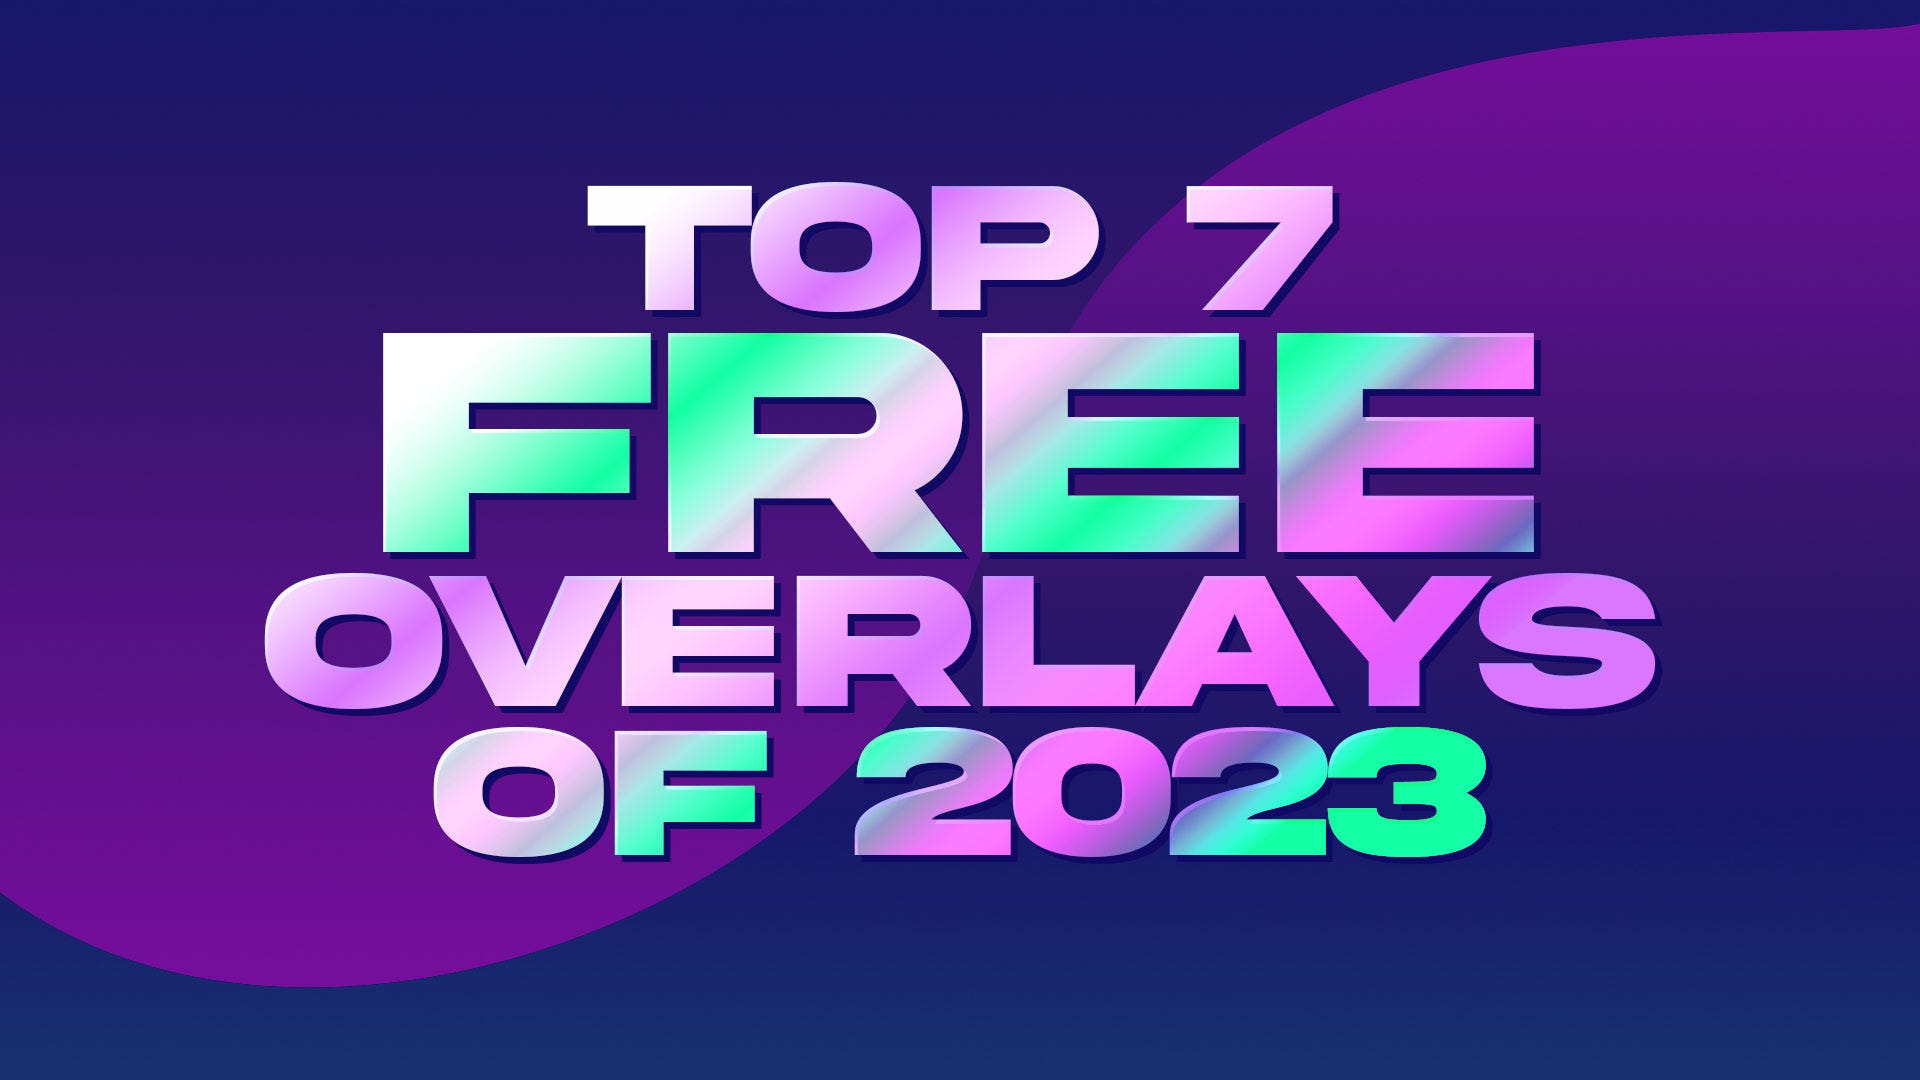 The Top 7 Green Screens for Streaming in 2023 – Restream Blog